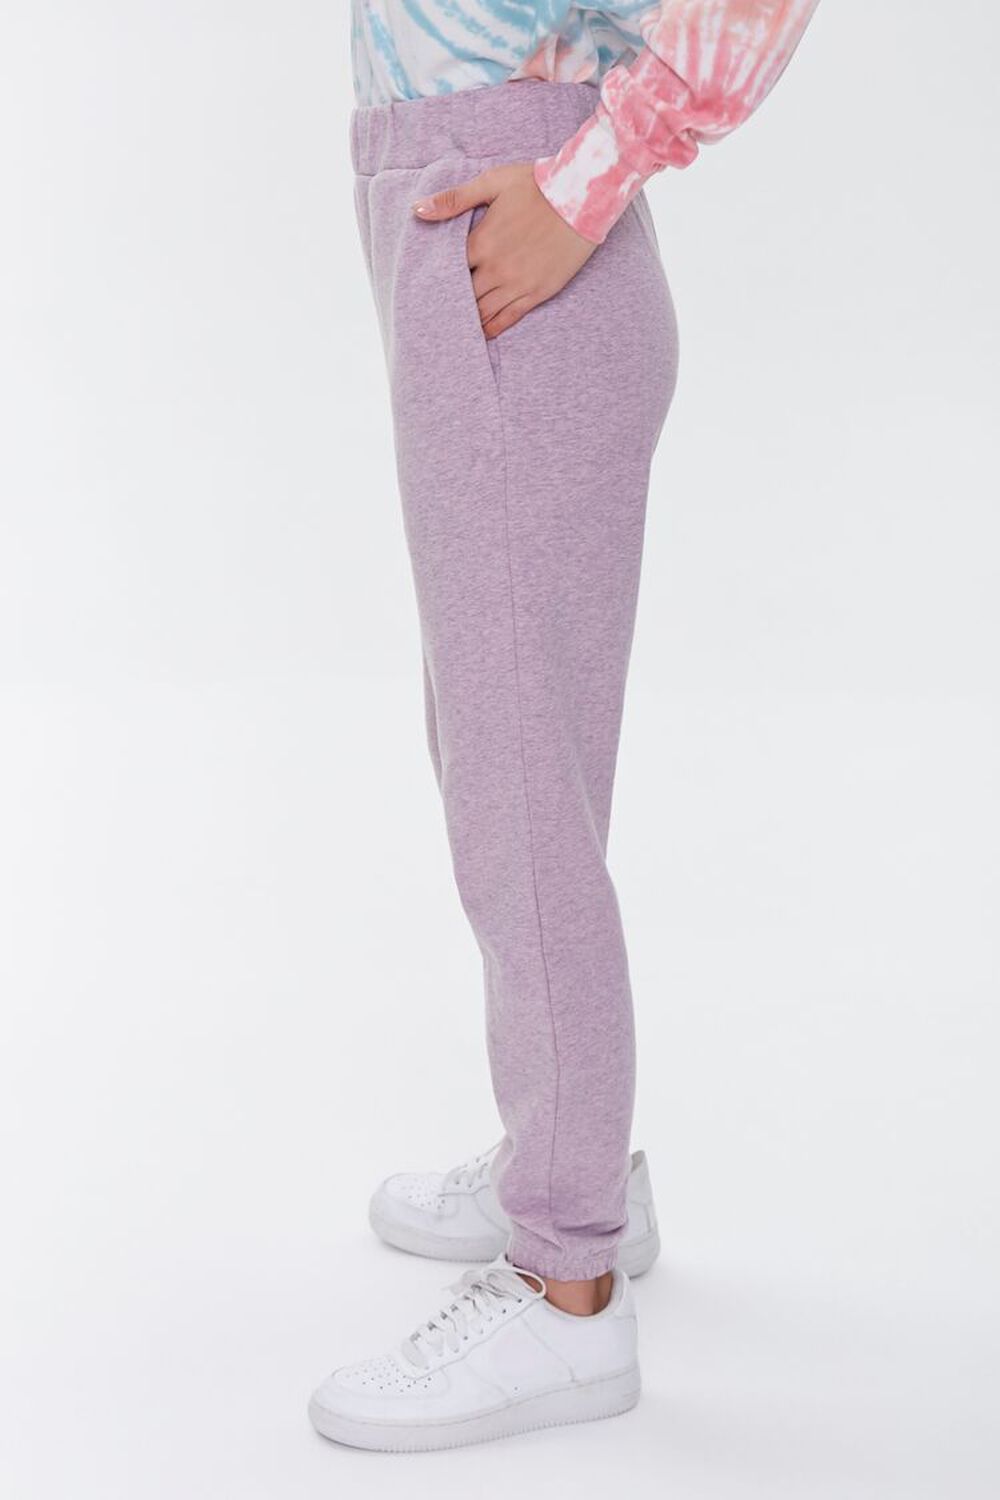 French Terry Pocket Joggers, image 3